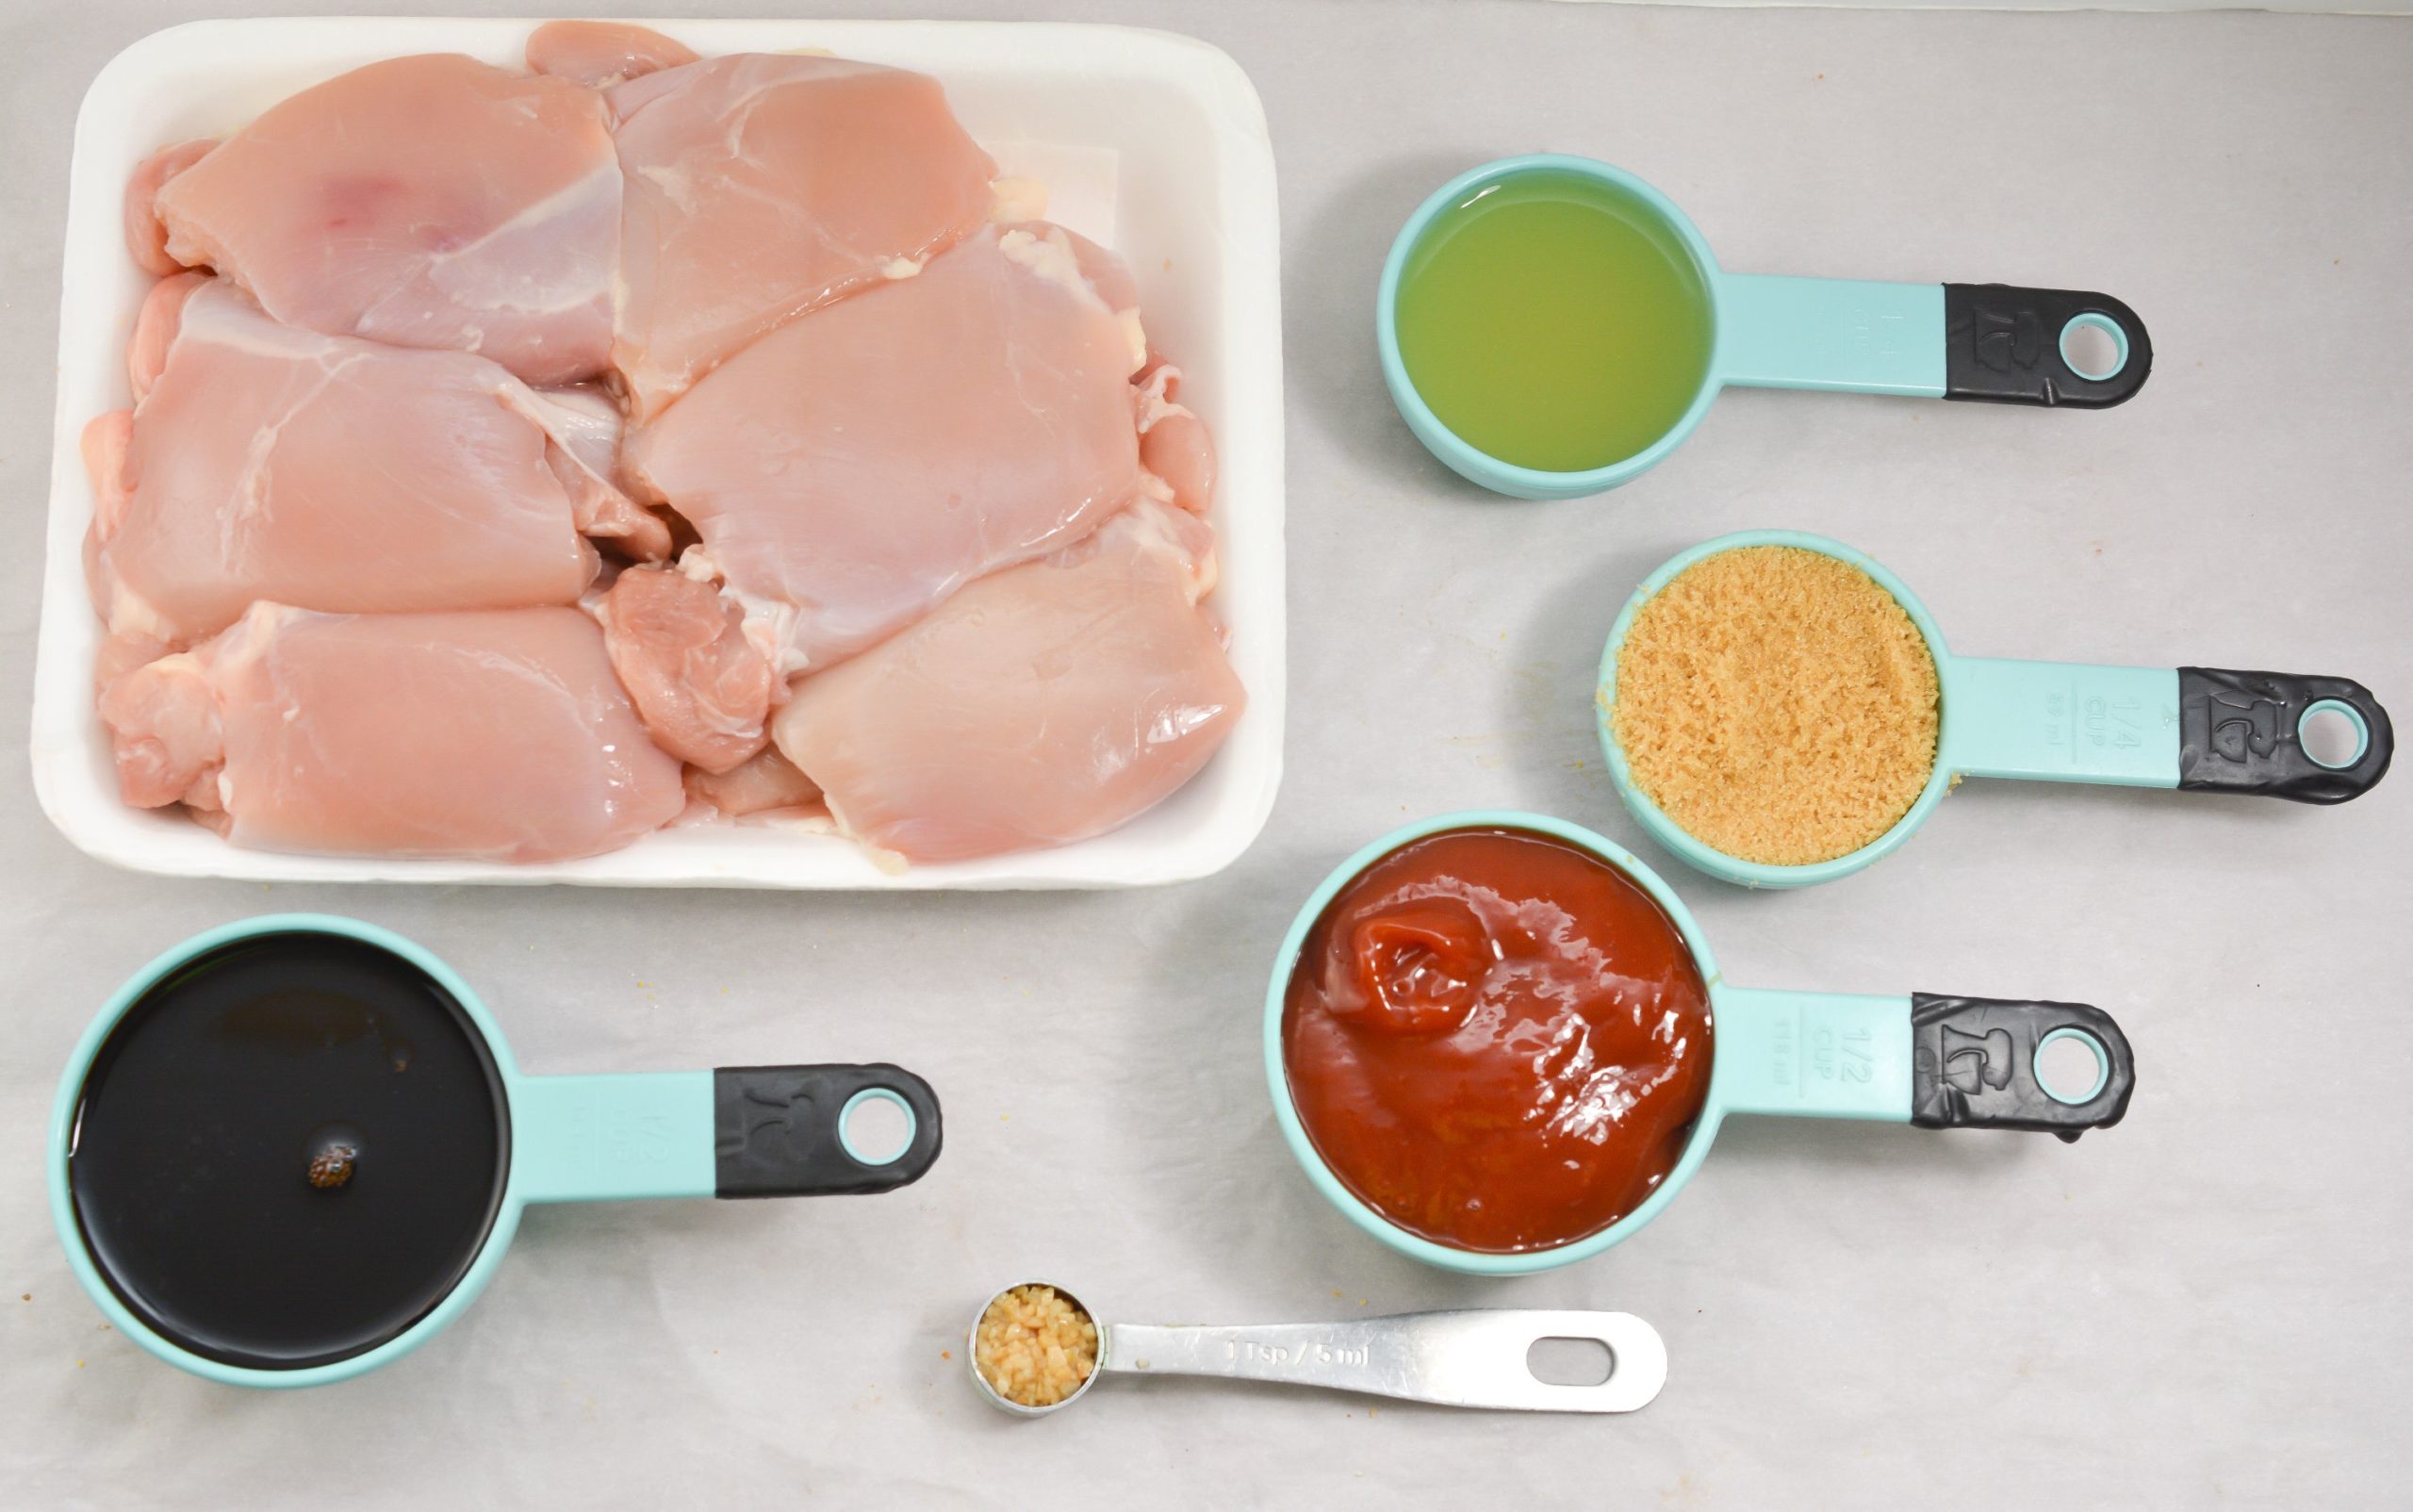 Raw chicken and sauce ingredients.